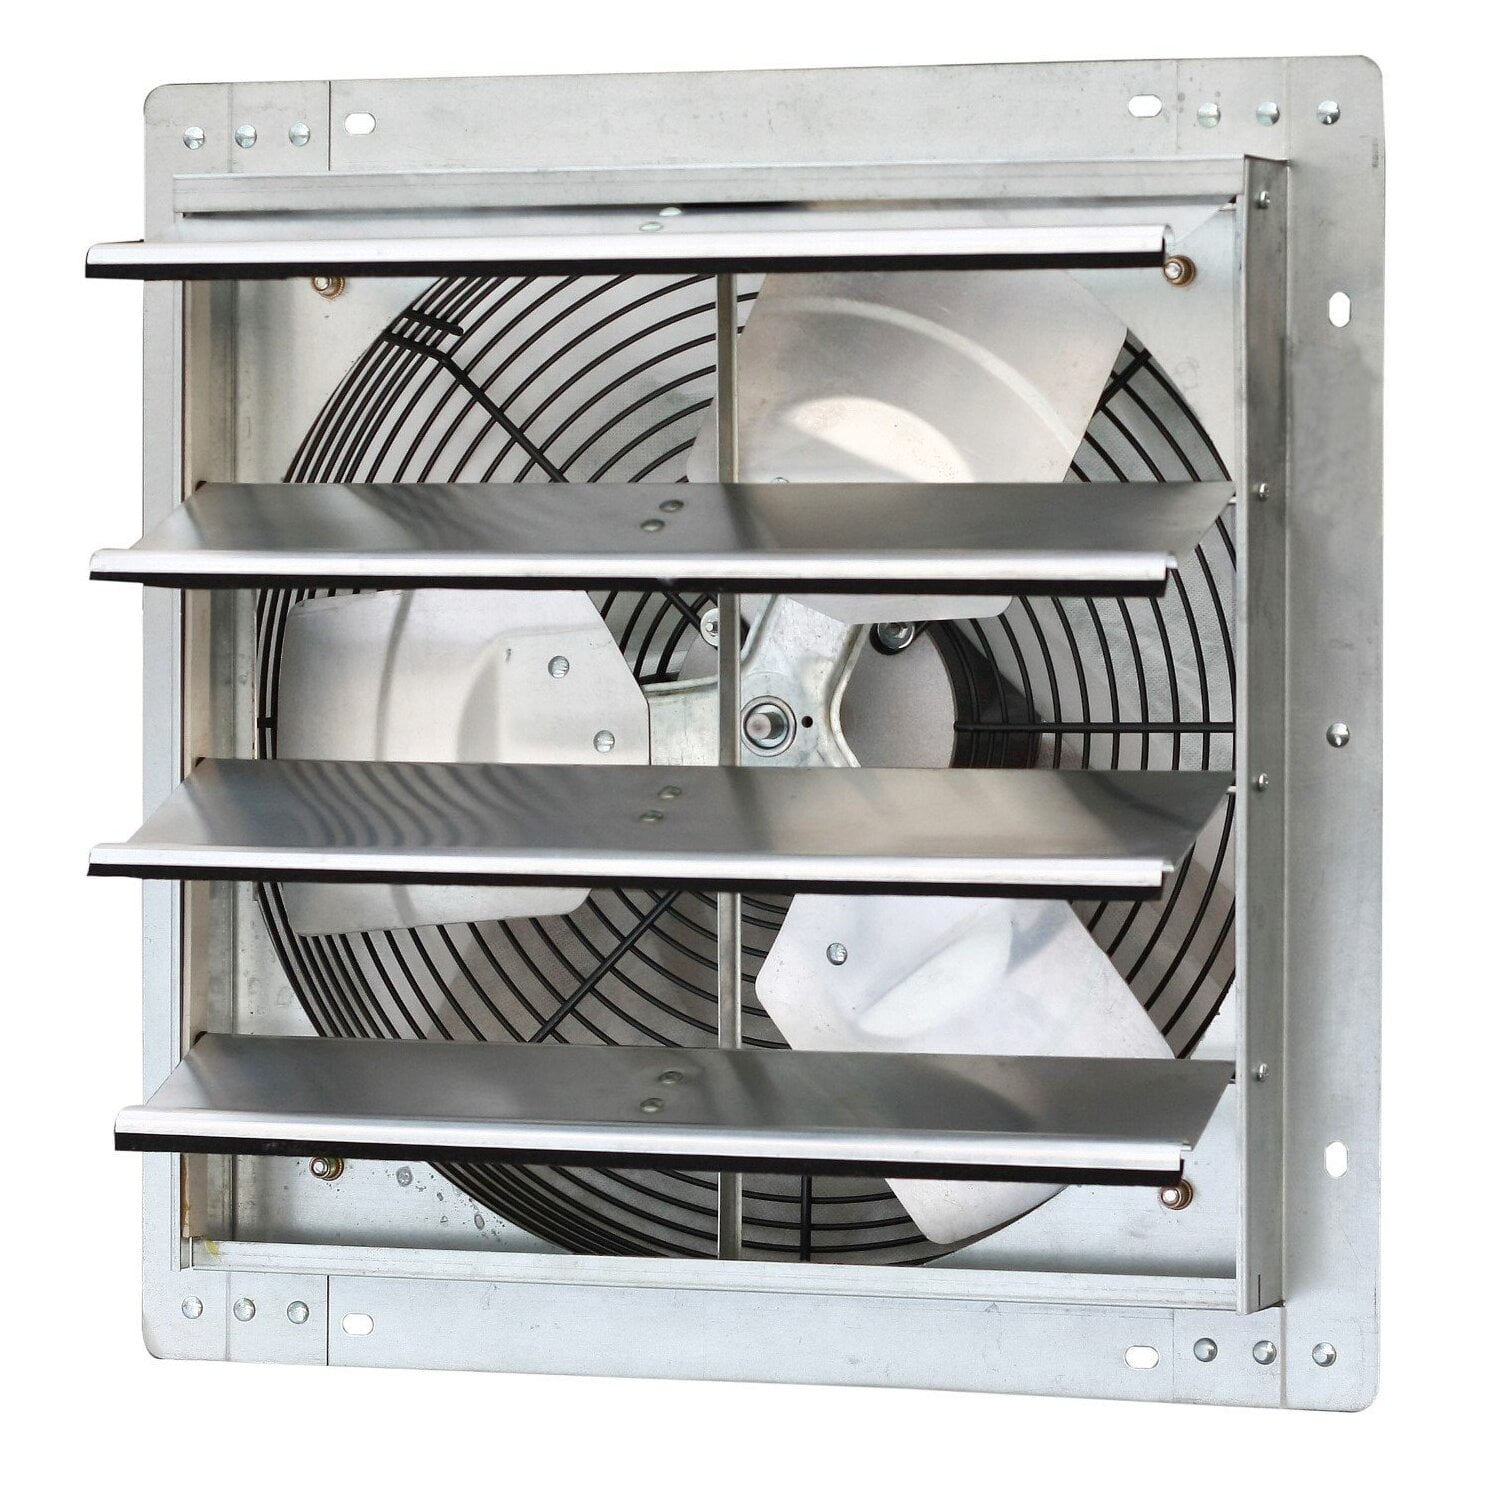 12 12 iLIVING USA ILG8SF12V Iliving 12 Inch Variable Speed Shutter Exhaust Fan Wall-Mounted 